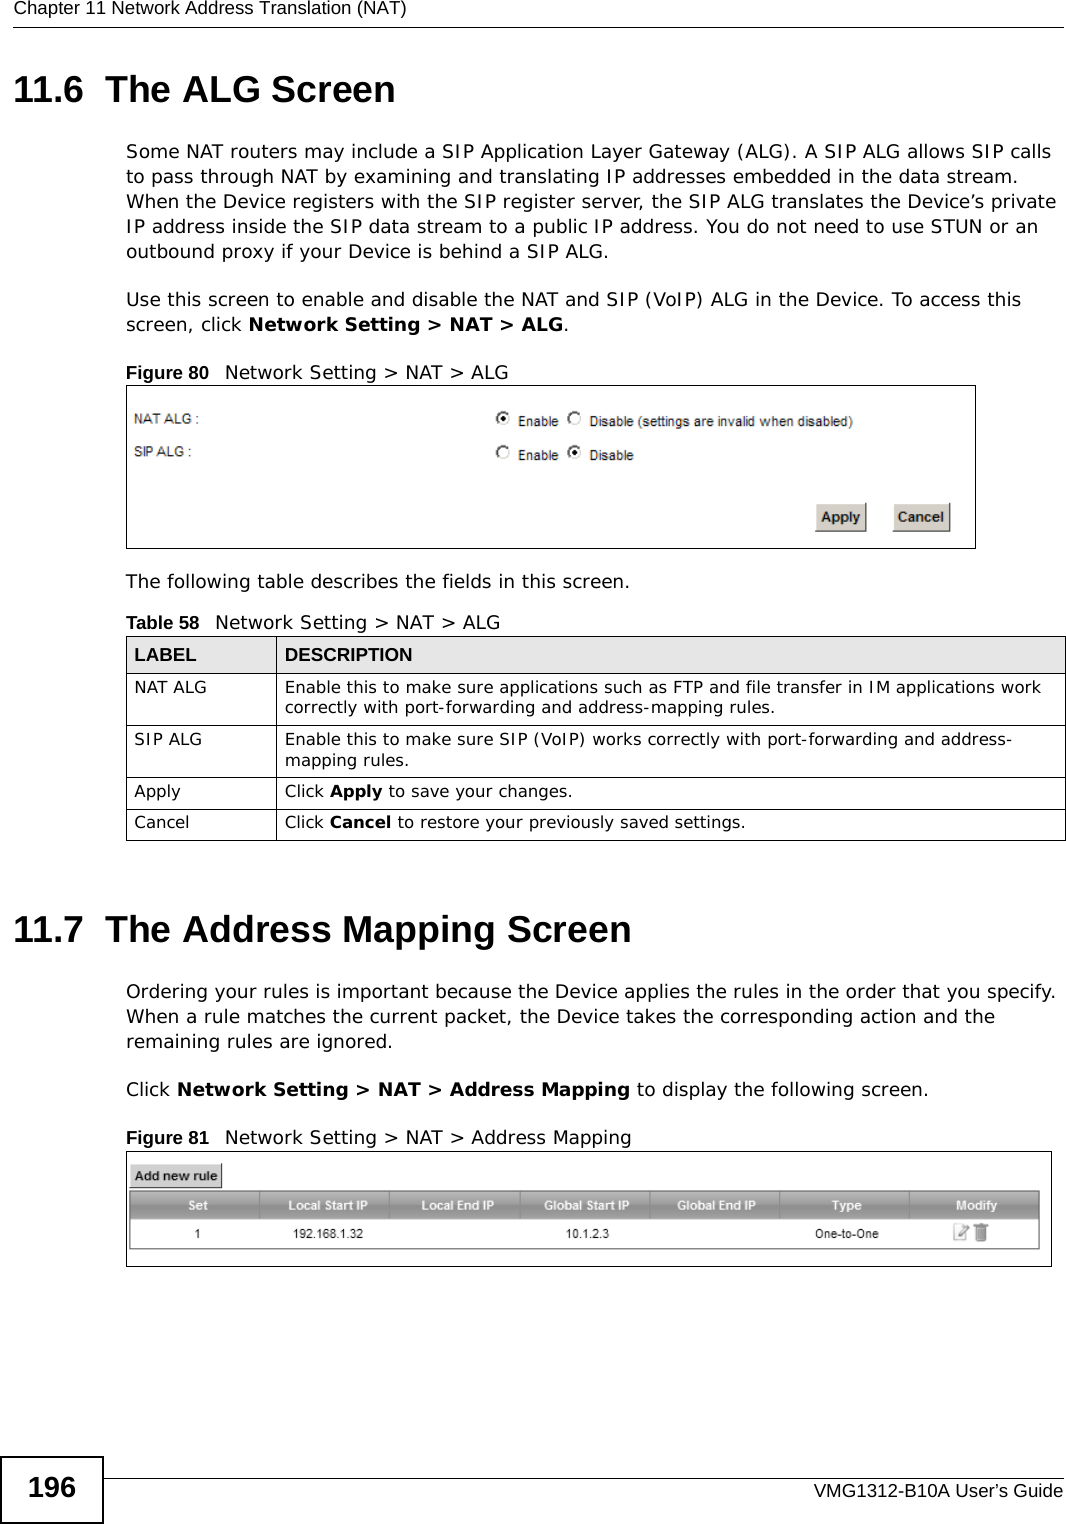 Chapter 11 Network Address Translation (NAT)VMG1312-B10A User’s Guide19611.6  The ALG ScreenSome NAT routers may include a SIP Application Layer Gateway (ALG). A SIP ALG allows SIP calls to pass through NAT by examining and translating IP addresses embedded in the data stream. When the Device registers with the SIP register server, the SIP ALG translates the Device’s private IP address inside the SIP data stream to a public IP address. You do not need to use STUN or an outbound proxy if your Device is behind a SIP ALG.Use this screen to enable and disable the NAT and SIP (VoIP) ALG in the Device. To access this screen, click Network Setting &gt; NAT &gt; ALG.Figure 80   Network Setting &gt; NAT &gt; ALGThe following table describes the fields in this screen.11.7  The Address Mapping ScreenOrdering your rules is important because the Device applies the rules in the order that you specify. When a rule matches the current packet, the Device takes the corresponding action and the remaining rules are ignored. Click Network Setting &gt; NAT &gt; Address Mapping to display the following screen. Figure 81   Network Setting &gt; NAT &gt; Address MappingTable 58   Network Setting &gt; NAT &gt; ALGLABEL DESCRIPTIONNAT ALG Enable this to make sure applications such as FTP and file transfer in IM applications work correctly with port-forwarding and address-mapping rules.SIP ALG Enable this to make sure SIP (VoIP) works correctly with port-forwarding and address-mapping rules.Apply Click Apply to save your changes.Cancel Click Cancel to restore your previously saved settings.